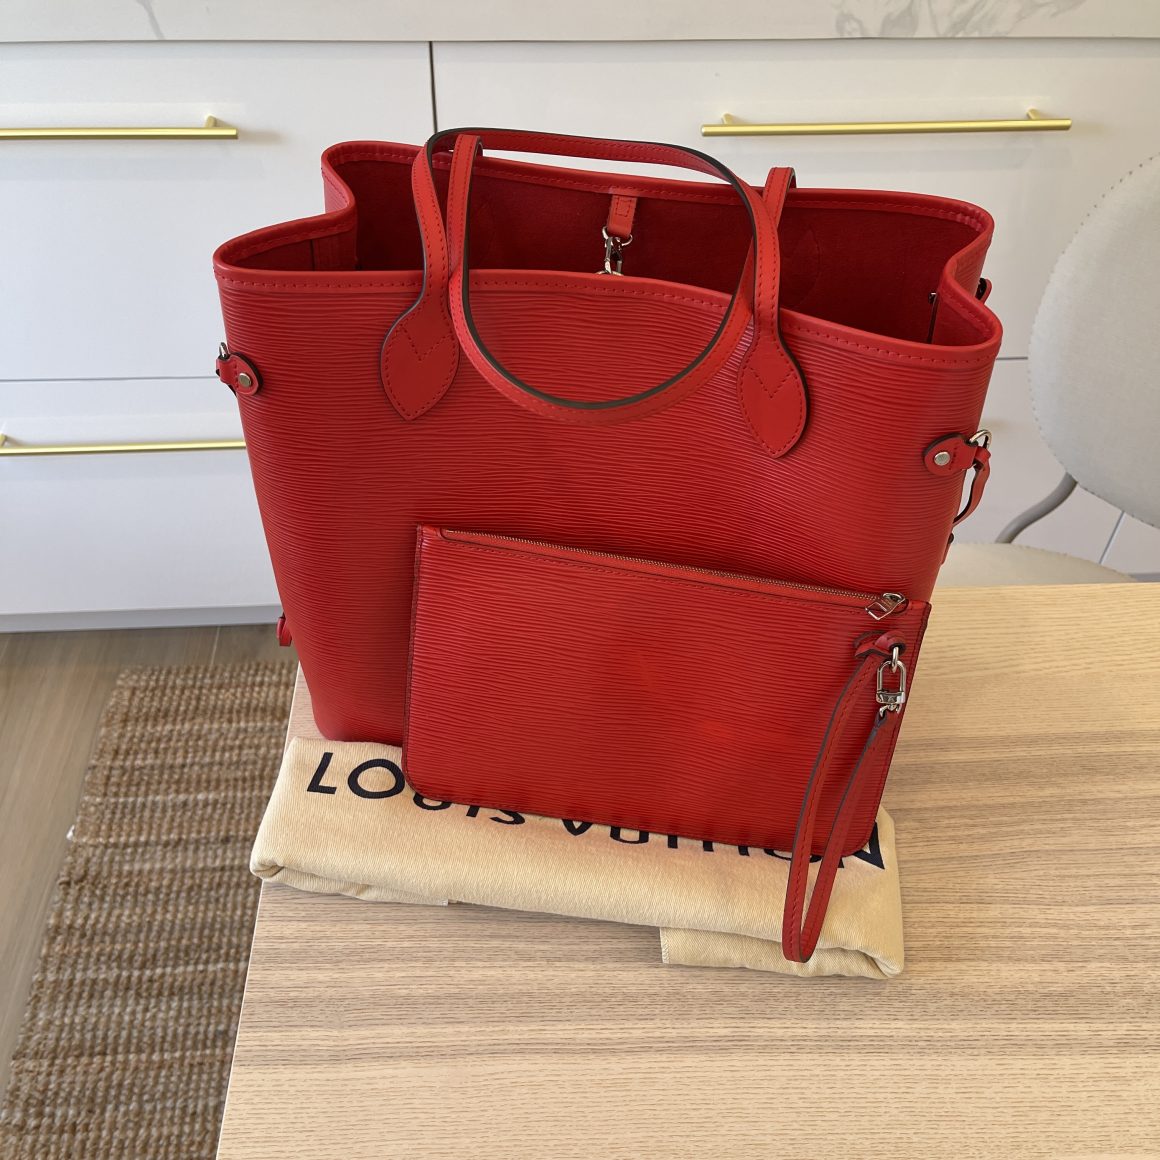 Louis Vuitton M41318 Neverfull MM Red Epi Tote Bag 11443